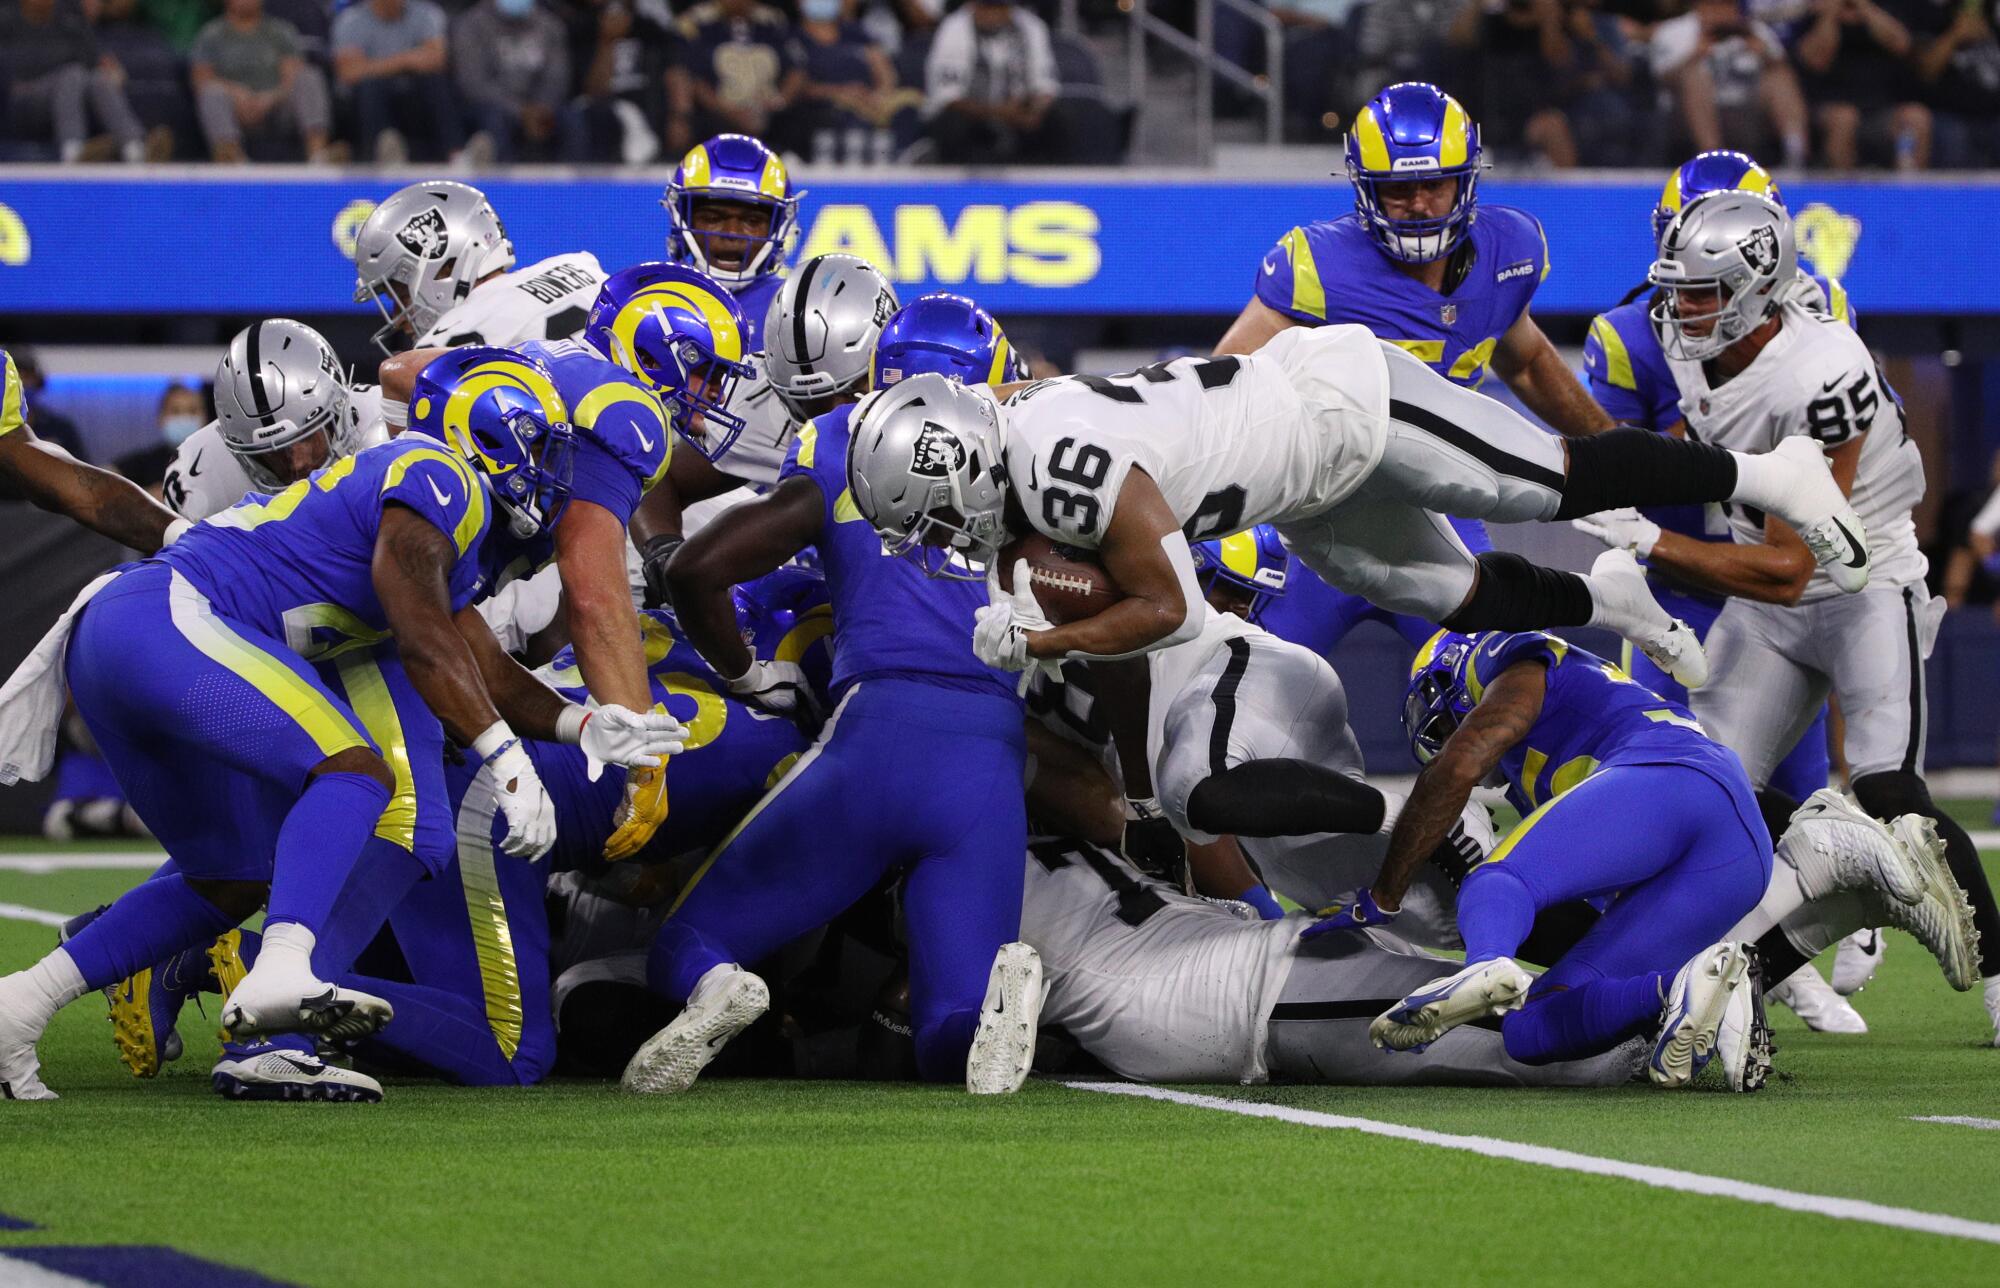 Raiders running back Trey Ragas leaps into the end zone to score against the Rams defense on fourth down.